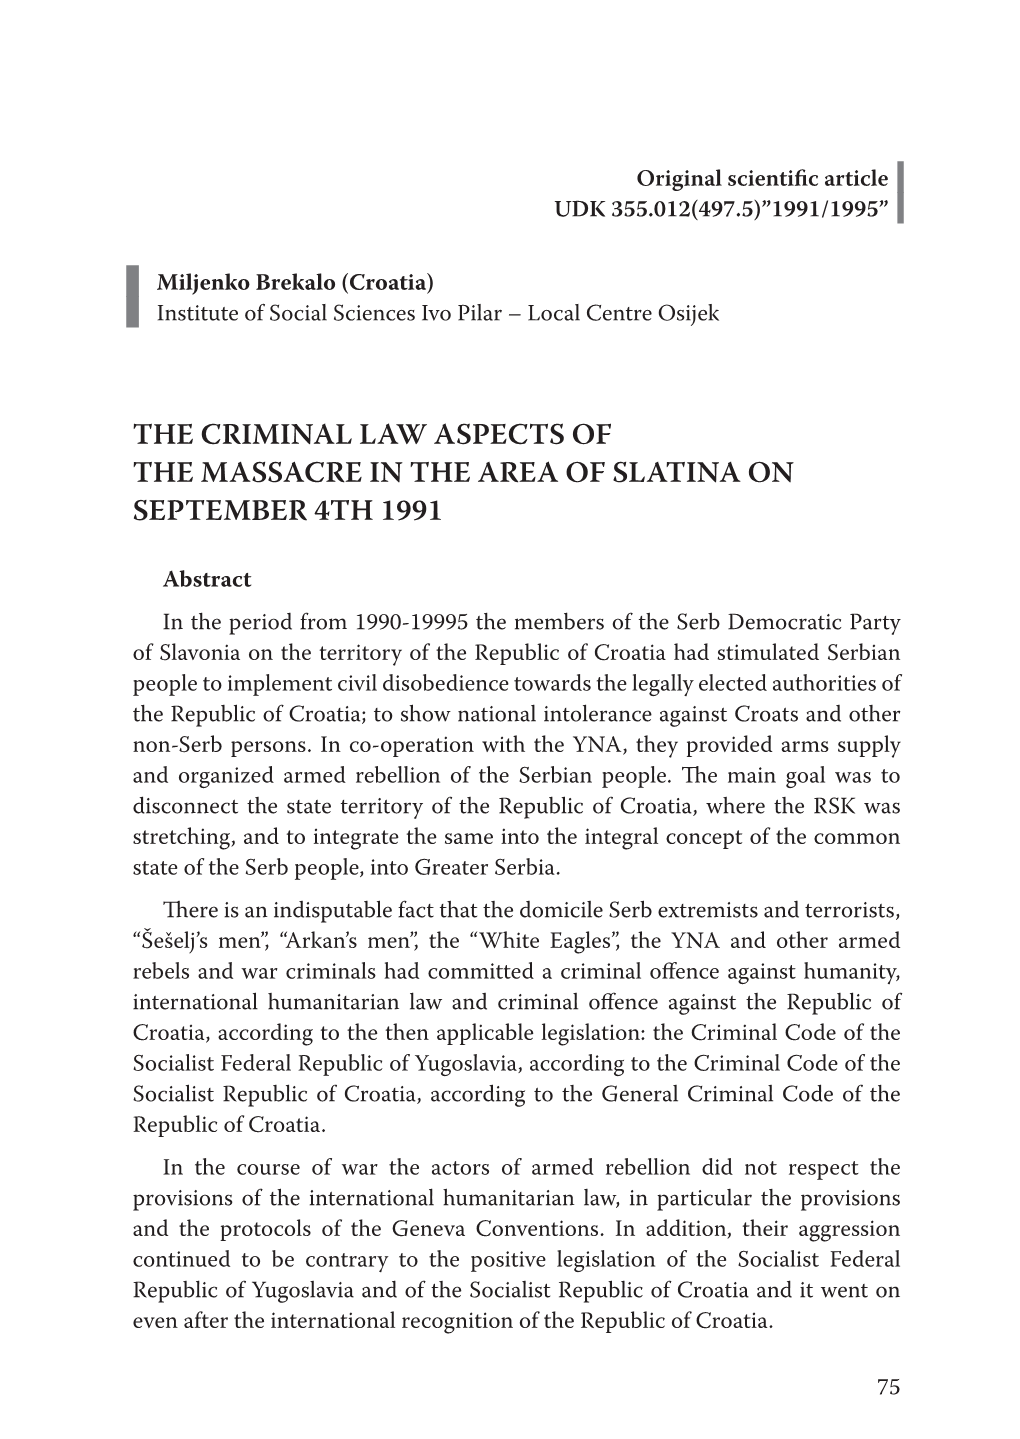 The Criminal Law Aspects of the Massacre in the Area of Slatina on September 4Th 1991